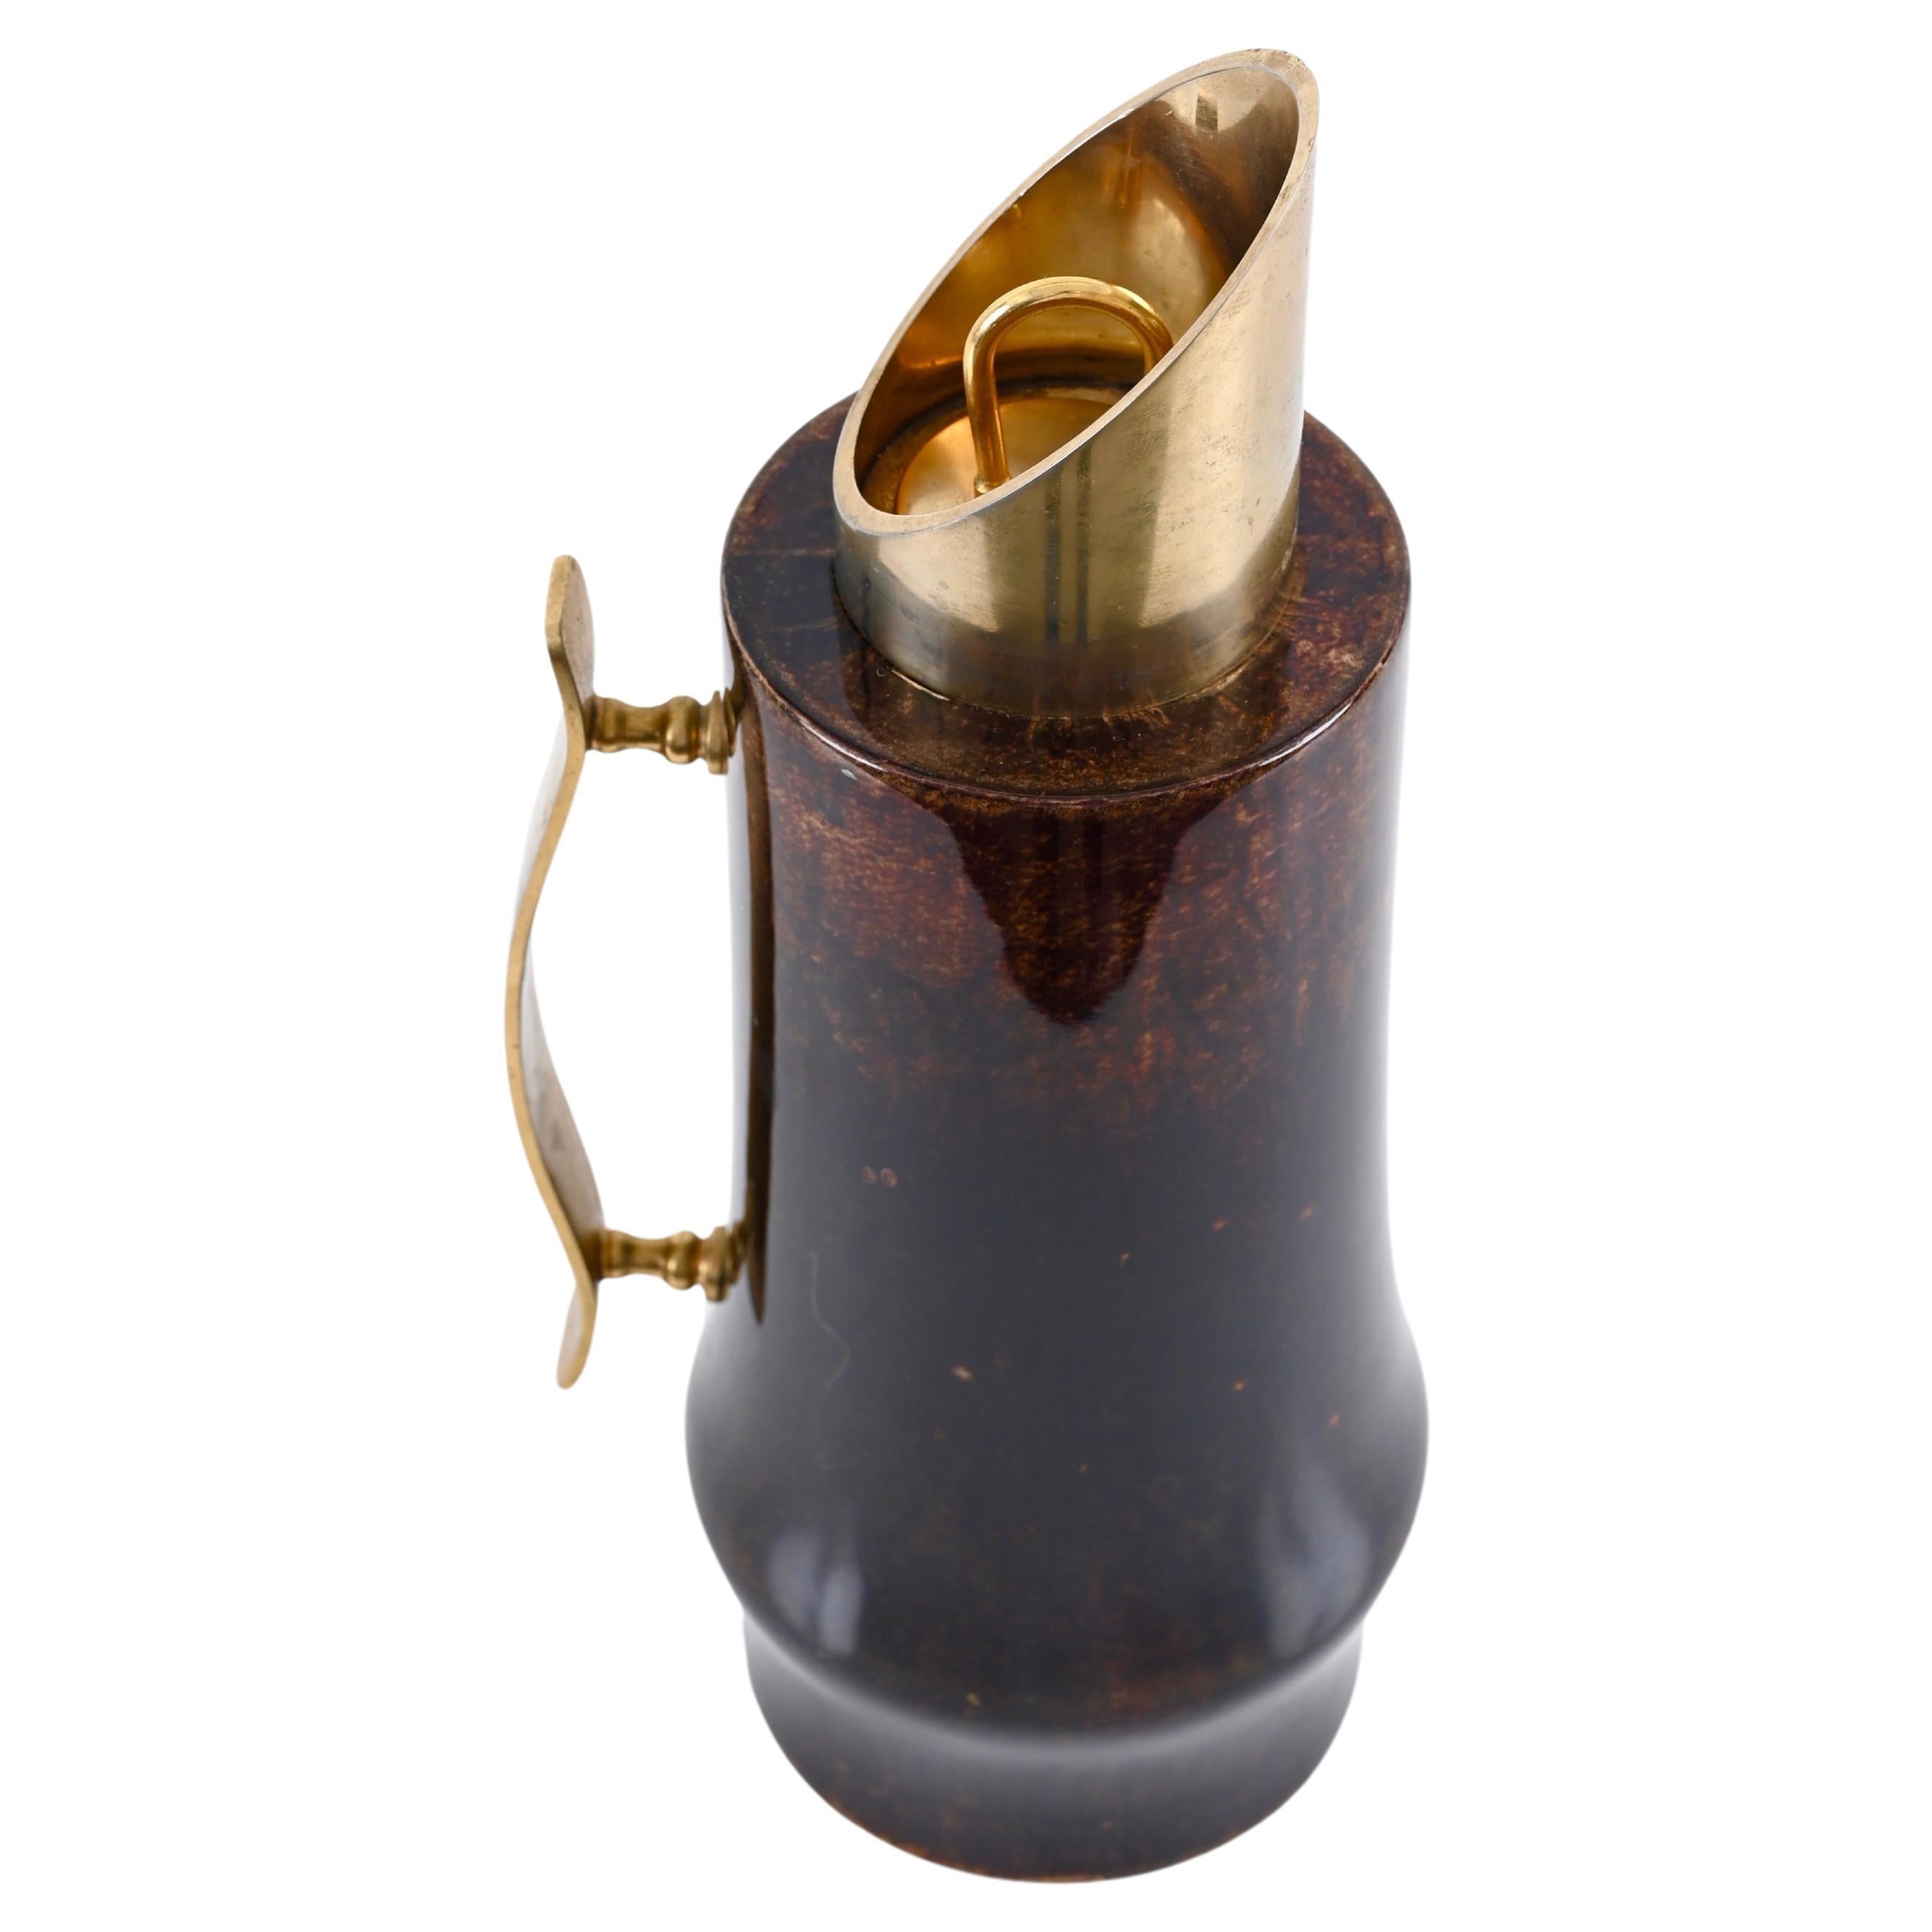 Aldo Tura Midcentury Goatskin and Brass Thermos Decanter for Macabo, Italy 1950s For Sale